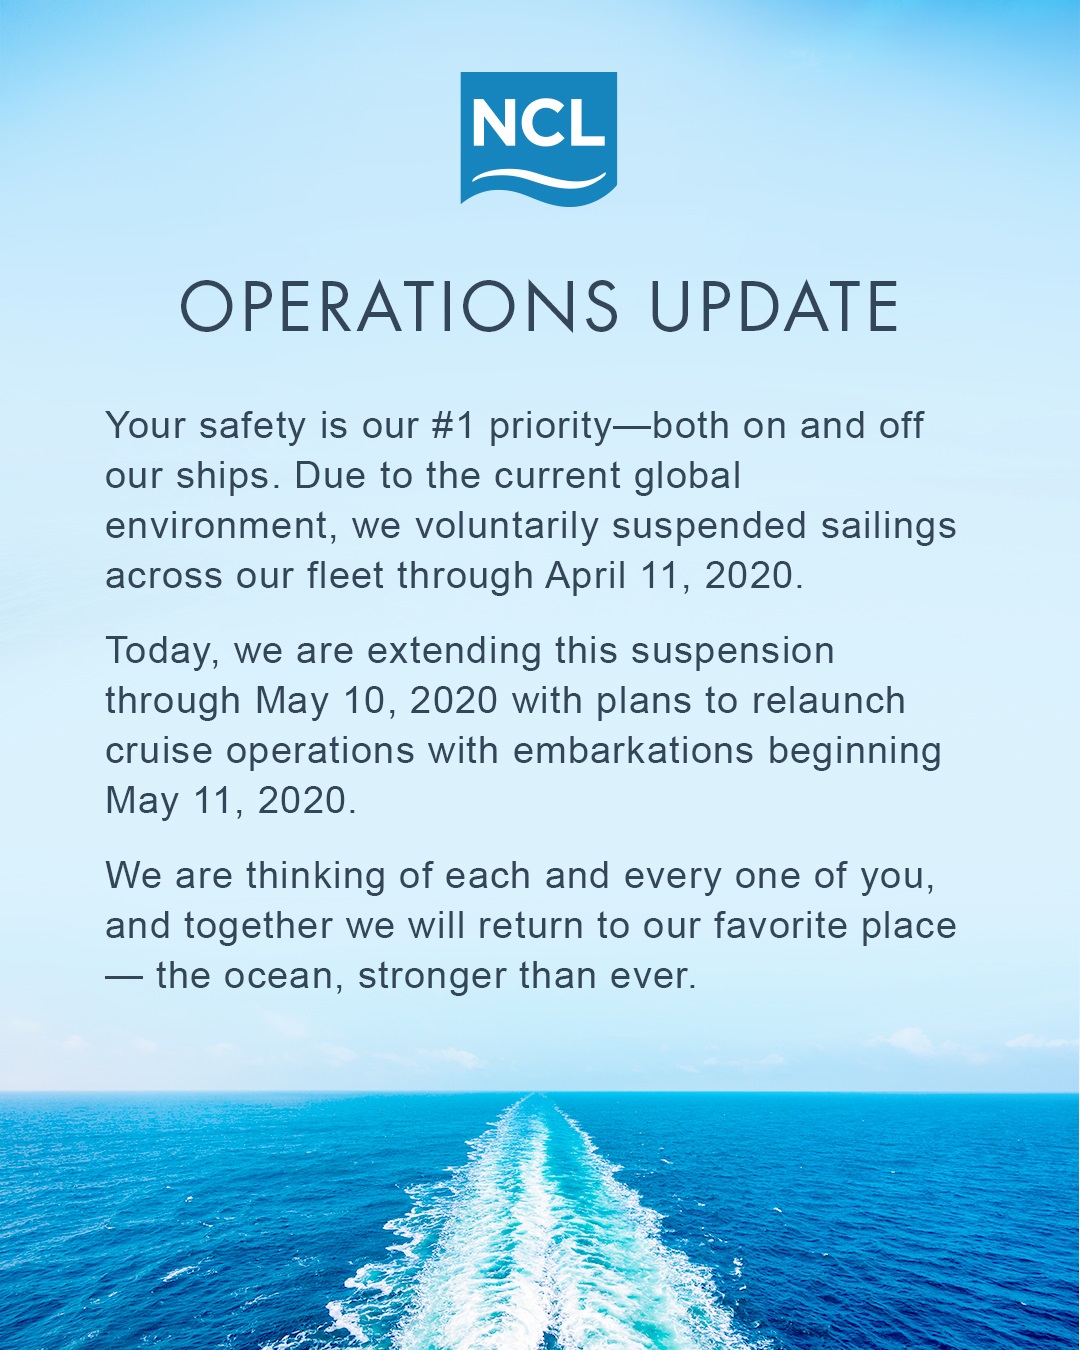 NCL has further delayed #cruising through May 10th